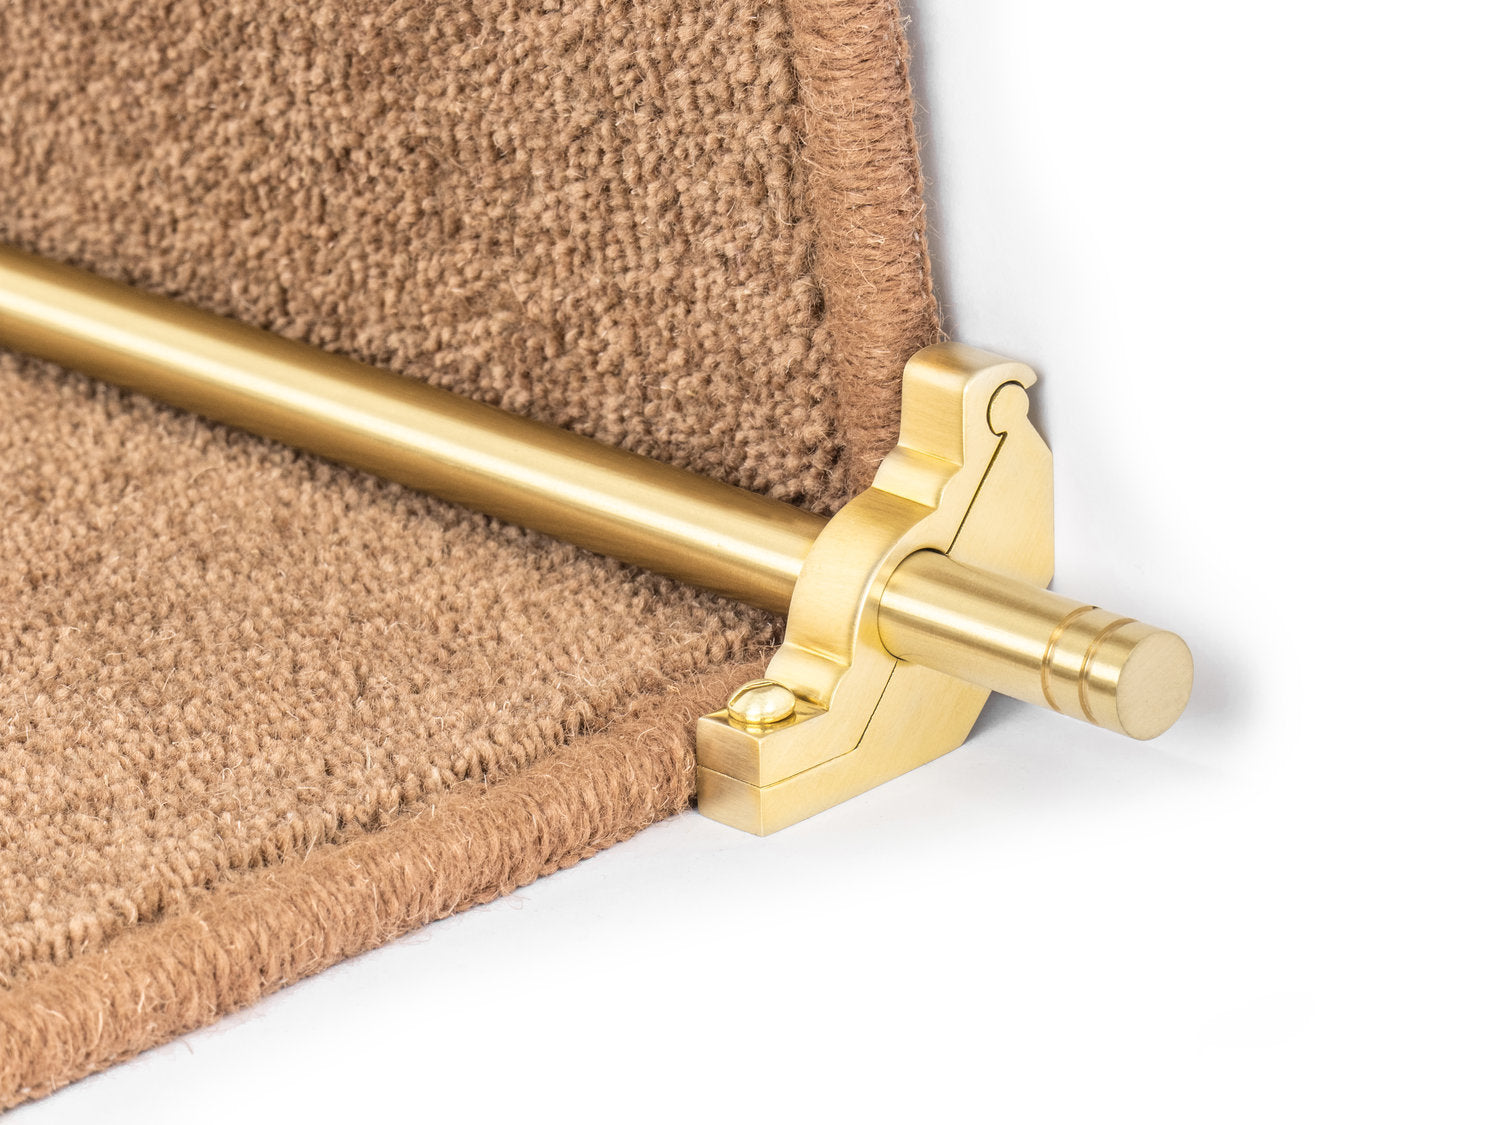 Premier Woburn stair rod solid core brass specialist finish